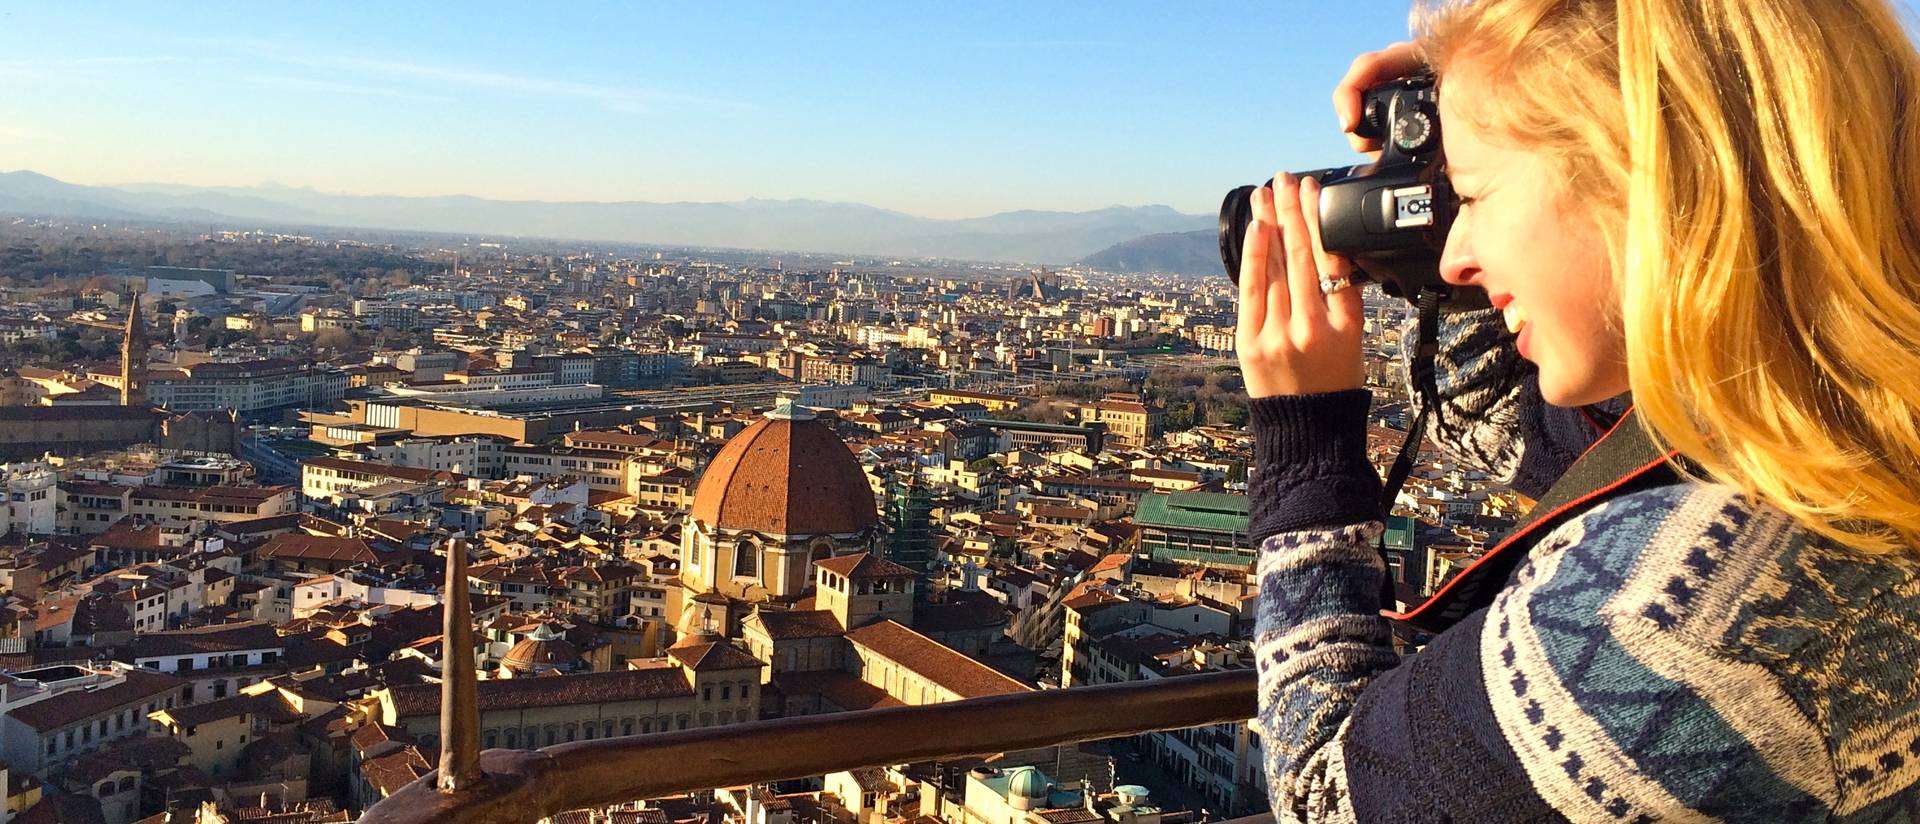 Humans of Study Abroad: 2015 Photo Contest